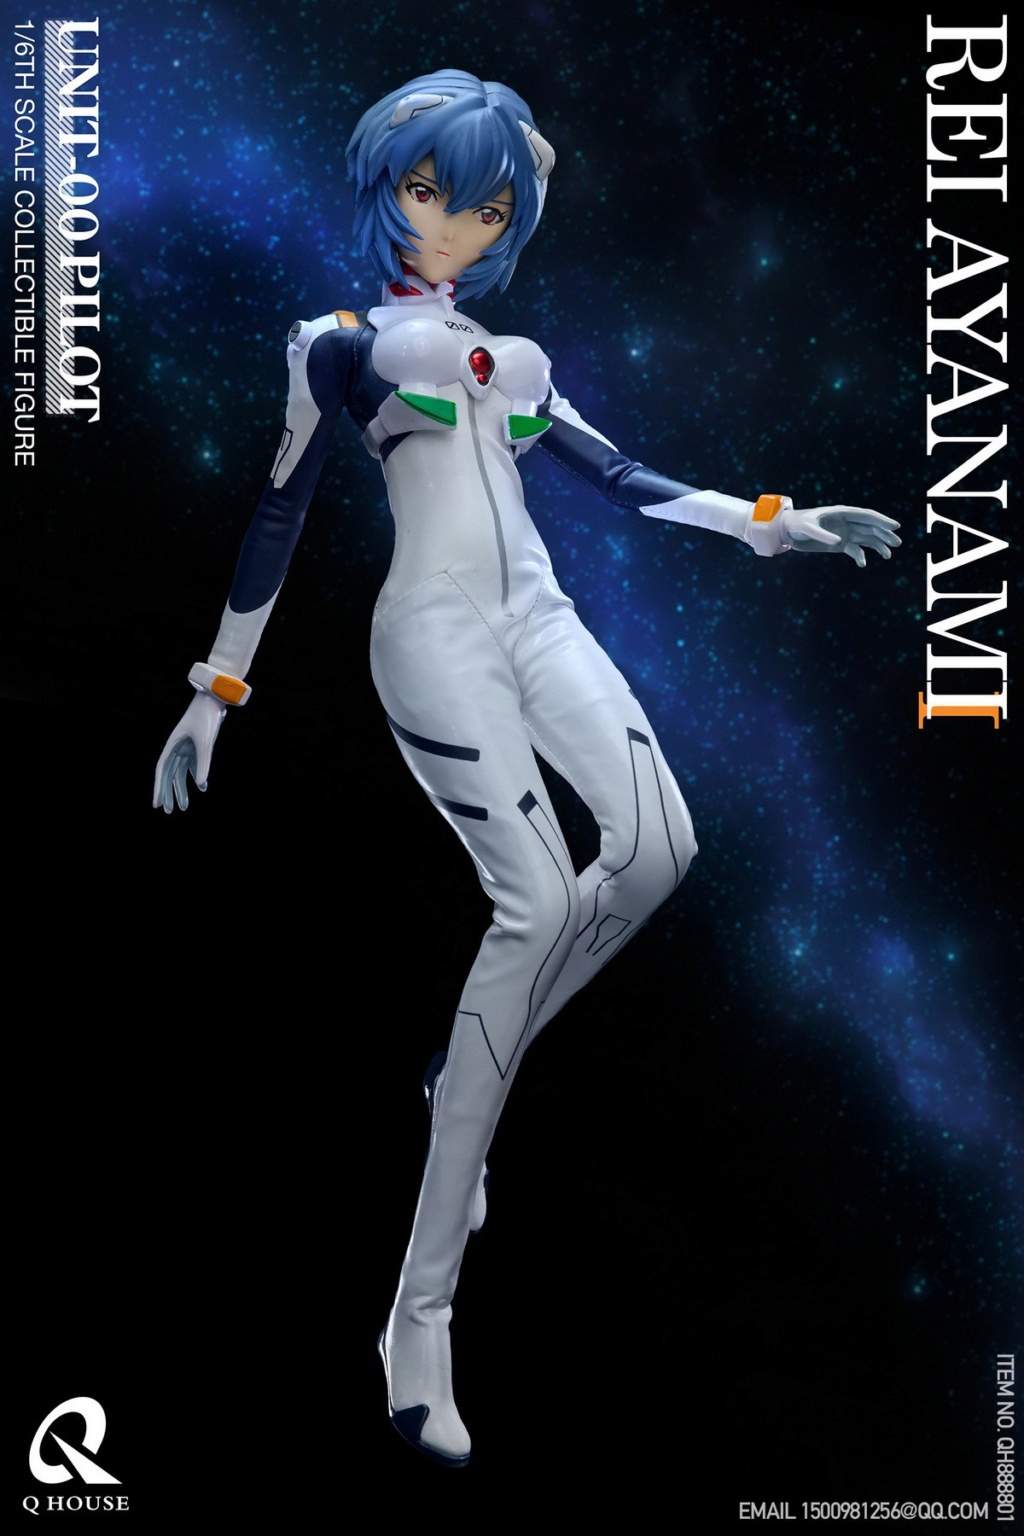 NEW PRODUCT: Q House: 1/6 Evangelion - Rei Ayanami  11143911